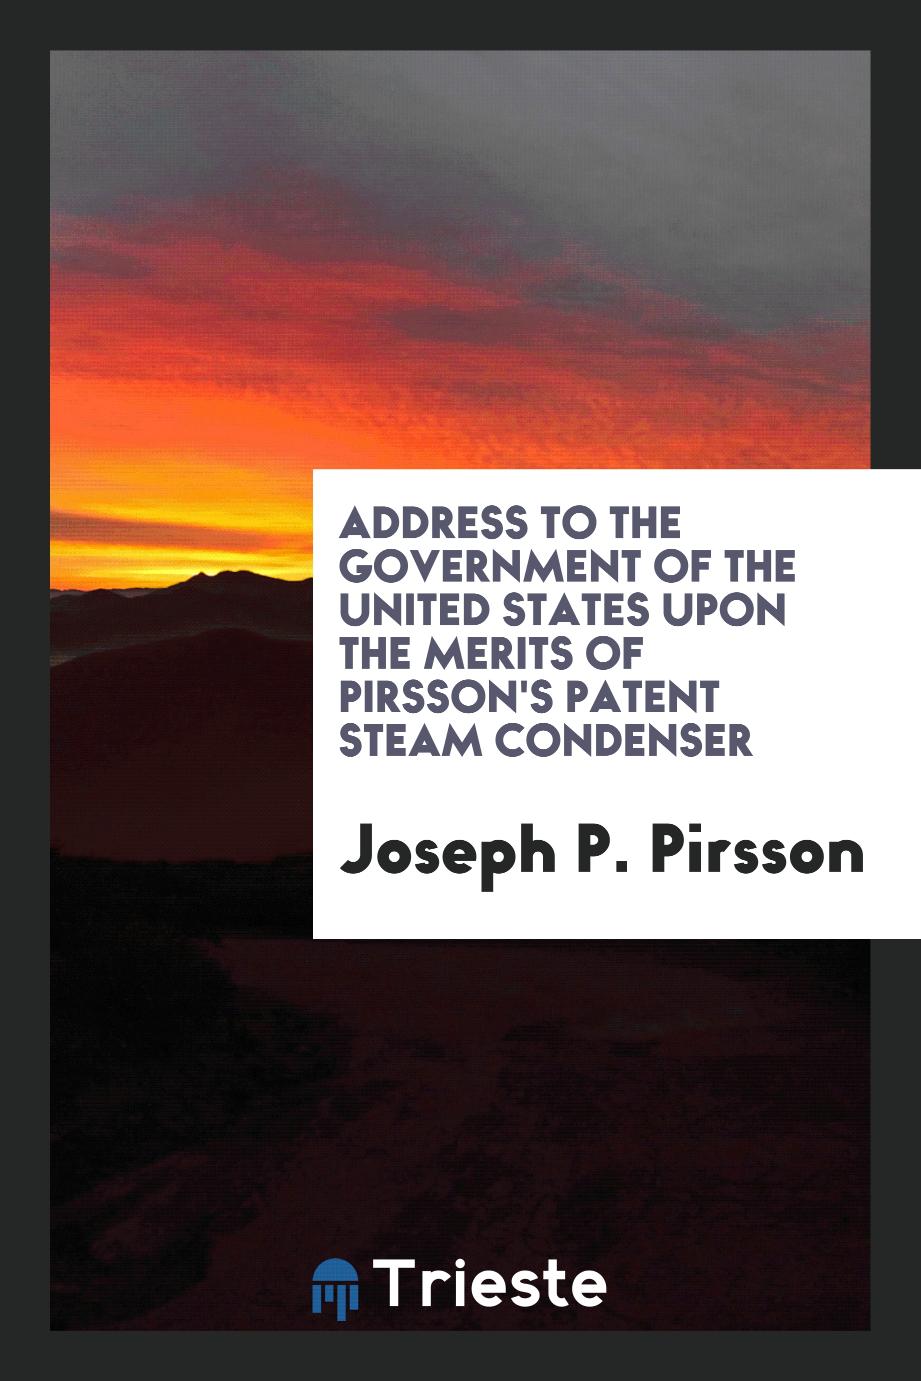 Address to the Government of the United States Upon the Merits of Pirsson's Patent Steam Condenser